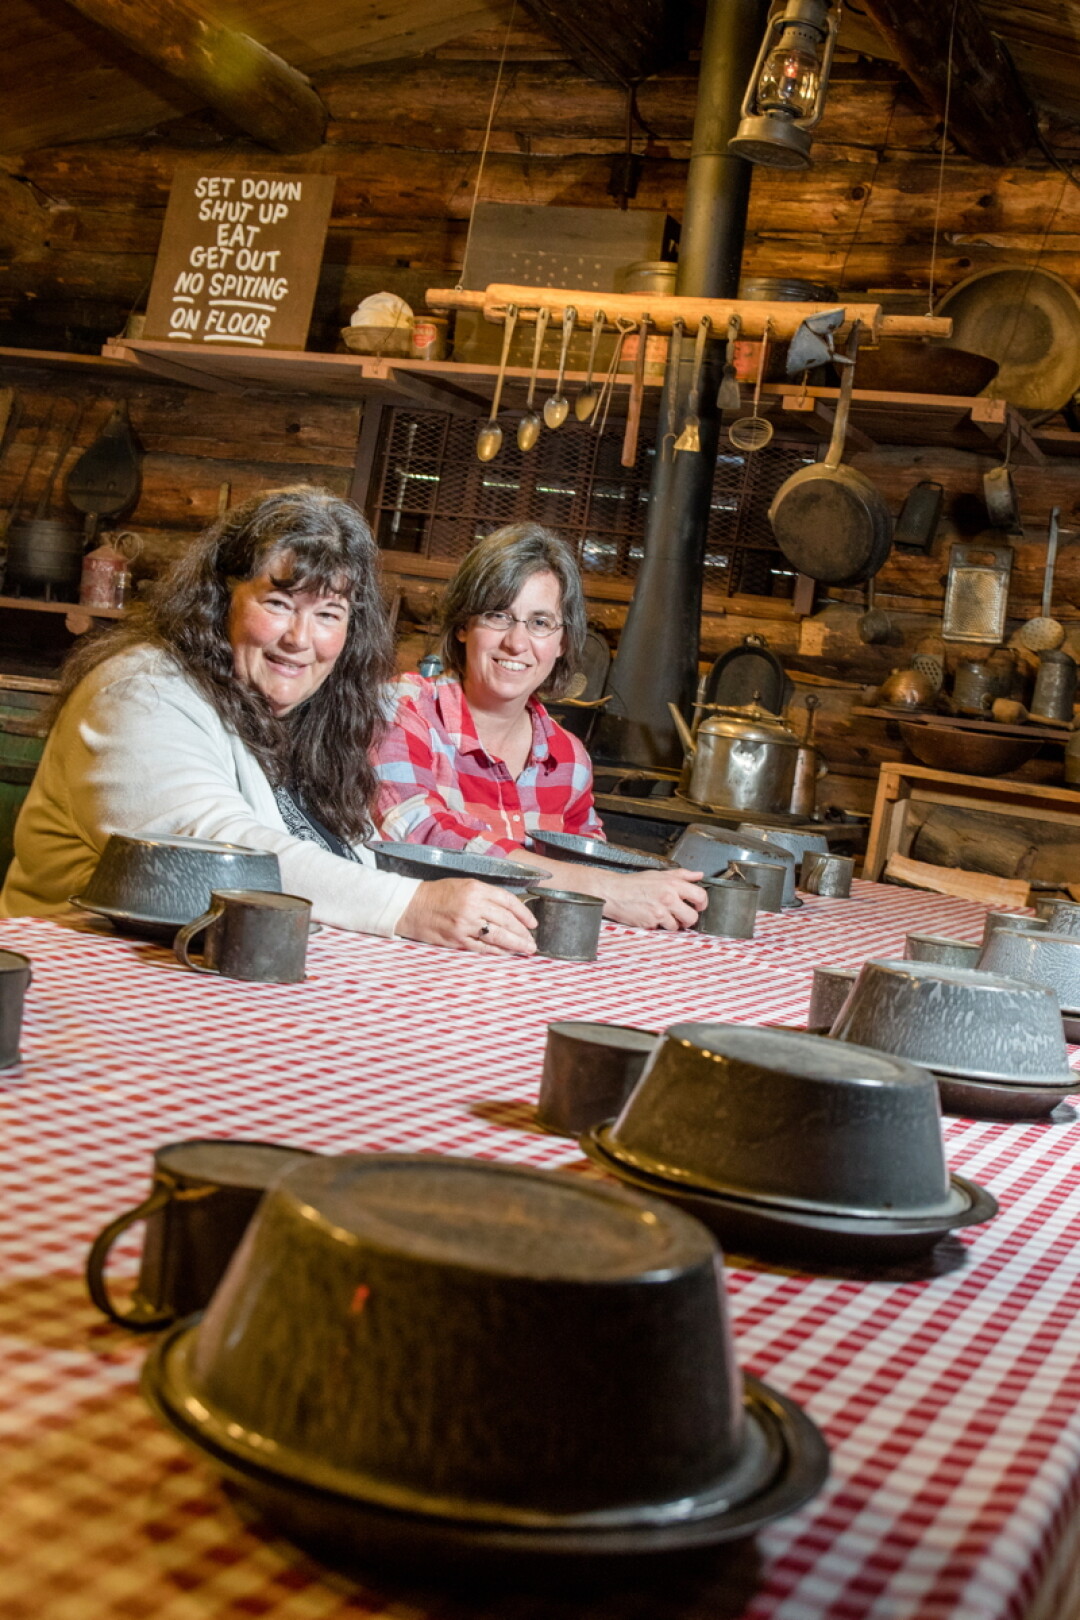 WAITING FOR THEIR FLAPJACKS. Diana Peterson and Carrie Ronnander, co-authors of Logging in Wisconsin, pose inside the cook shanty at the Paul Bunyan Logging Camp Museum in Eau Claire.